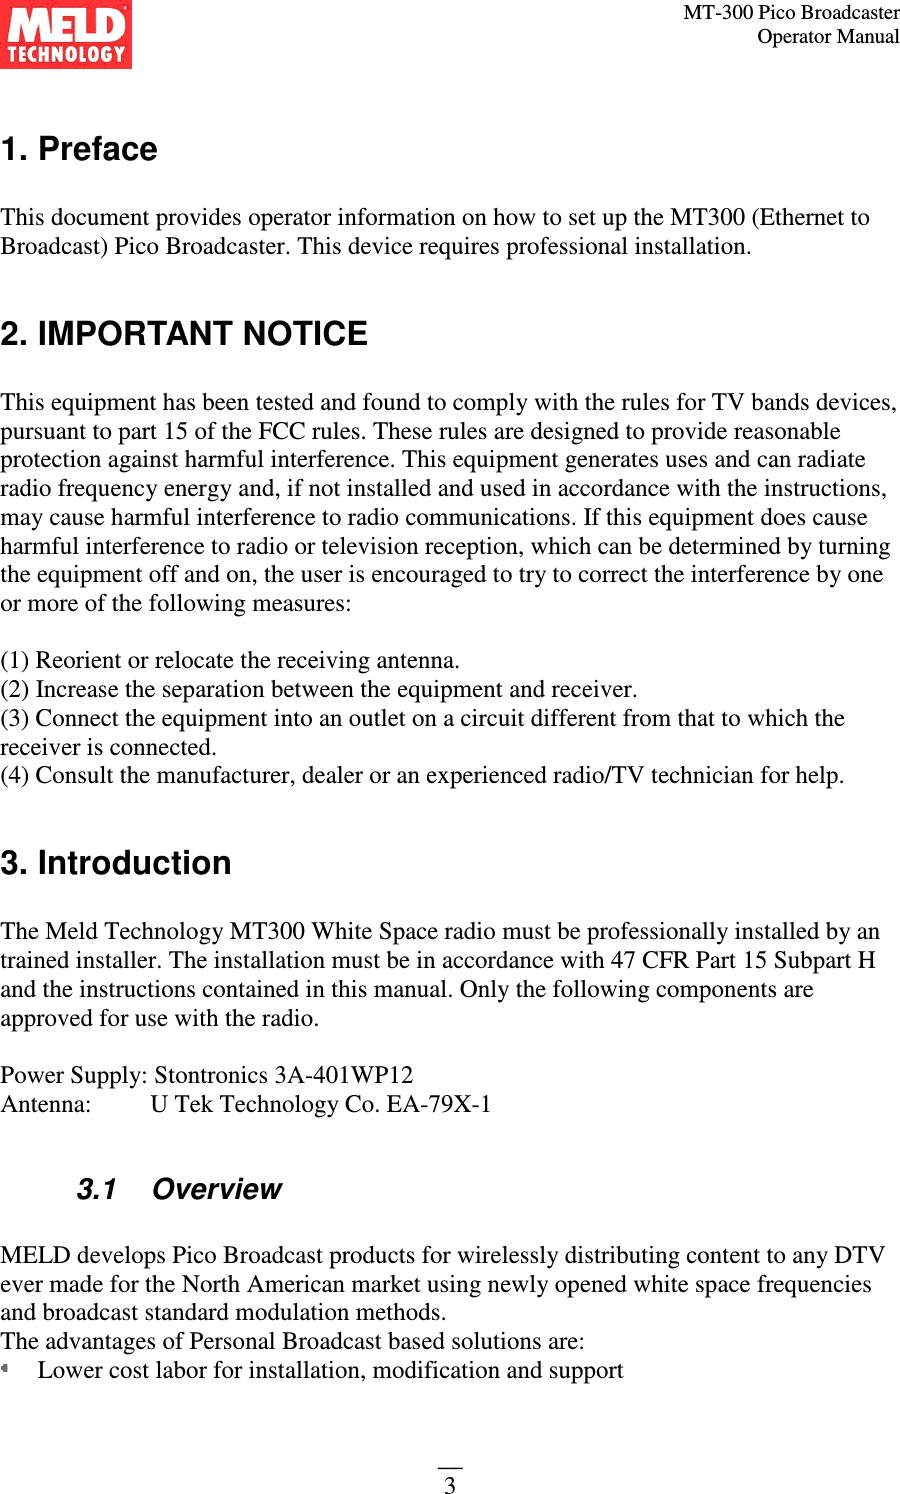 MT-300 Pico Broadcaster                                                                                                                                             Operator Manual __ 3  1. Preface  This document provides operator information on how to set up the MT300 (Ethernet to Broadcast) Pico Broadcaster. This device requires professional installation.  2. IMPORTANT NOTICE  This equipment has been tested and found to comply with the rules for TV bands devices, pursuant to part 15 of the FCC rules. These rules are designed to provide reasonable protection against harmful interference. This equipment generates uses and can radiate radio frequency energy and, if not installed and used in accordance with the instructions, may cause harmful interference to radio communications. If this equipment does cause harmful interference to radio or television reception, which can be determined by turning the equipment off and on, the user is encouraged to try to correct the interference by one or more of the following measures:  (1) Reorient or relocate the receiving antenna. (2) Increase the separation between the equipment and receiver. (3) Connect the equipment into an outlet on a circuit different from that to which the receiver is connected. (4) Consult the manufacturer, dealer or an experienced radio/TV technician for help.  3. Introduction   The Meld Technology MT300 White Space radio must be professionally installed by an trained installer. The installation must be in accordance with 47 CFR Part 15 Subpart H and the instructions contained in this manual. Only the following components are approved for use with the radio.  Power Supply: Stontronics 3A-401WP12 Antenna:   U Tek Technology Co. EA-79X-1  3.1   Overview  MELD develops Pico Broadcast products for wirelessly distributing content to any DTV ever made for the North American market using newly opened white space frequencies and broadcast standard modulation methods.  The advantages of Personal Broadcast based solutions are:  Lower cost labor for installation, modification and support 